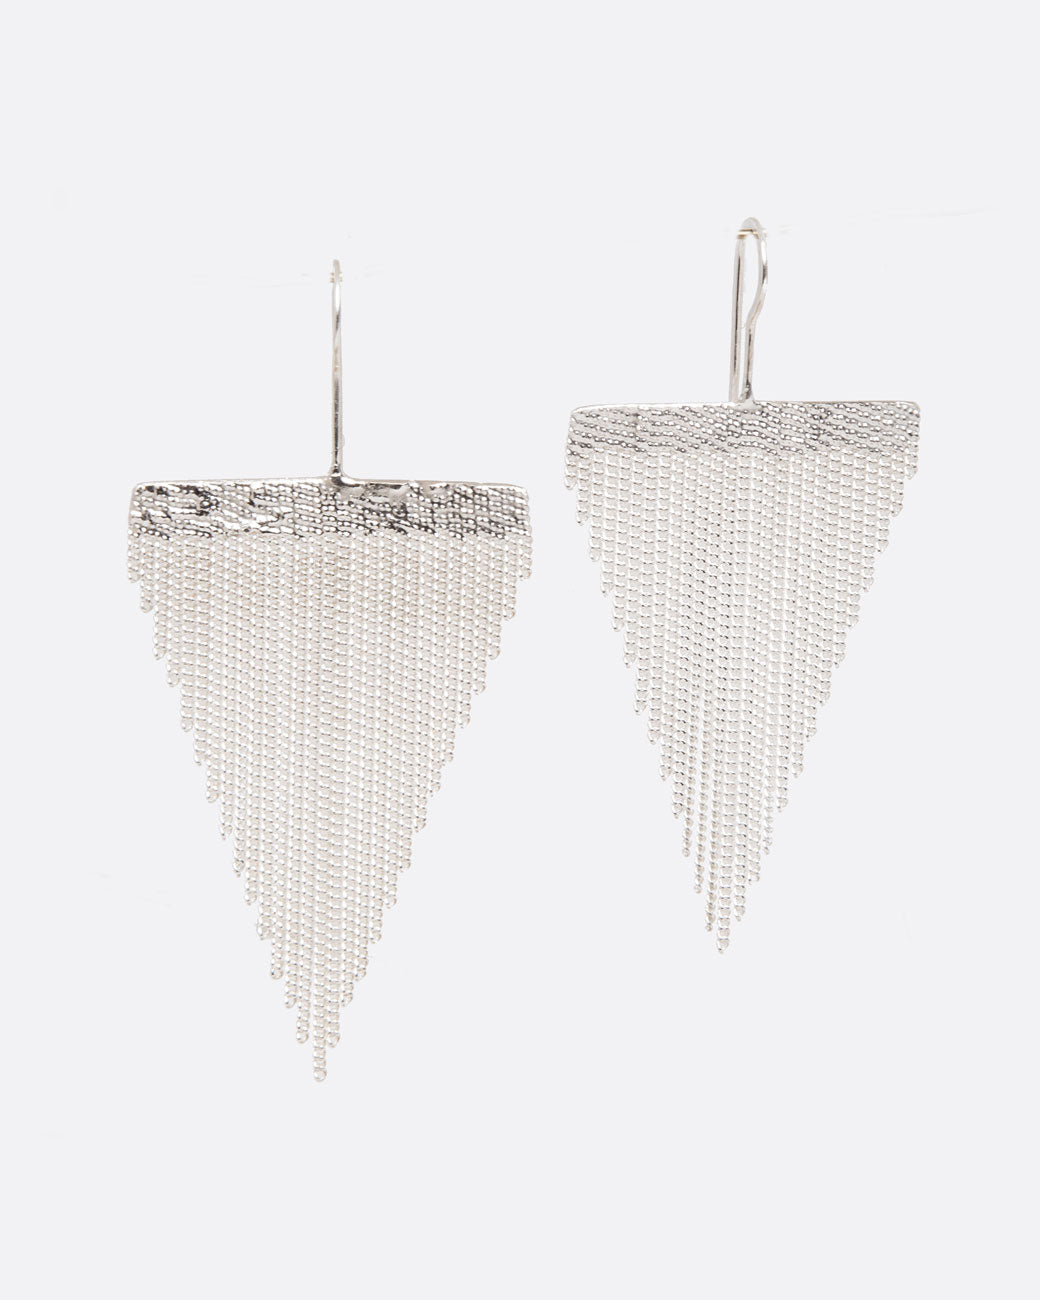 front view of long and large triangle earrings in silver. there is a solid bar at the top, while the rest of the earring is made of chains that hang free.